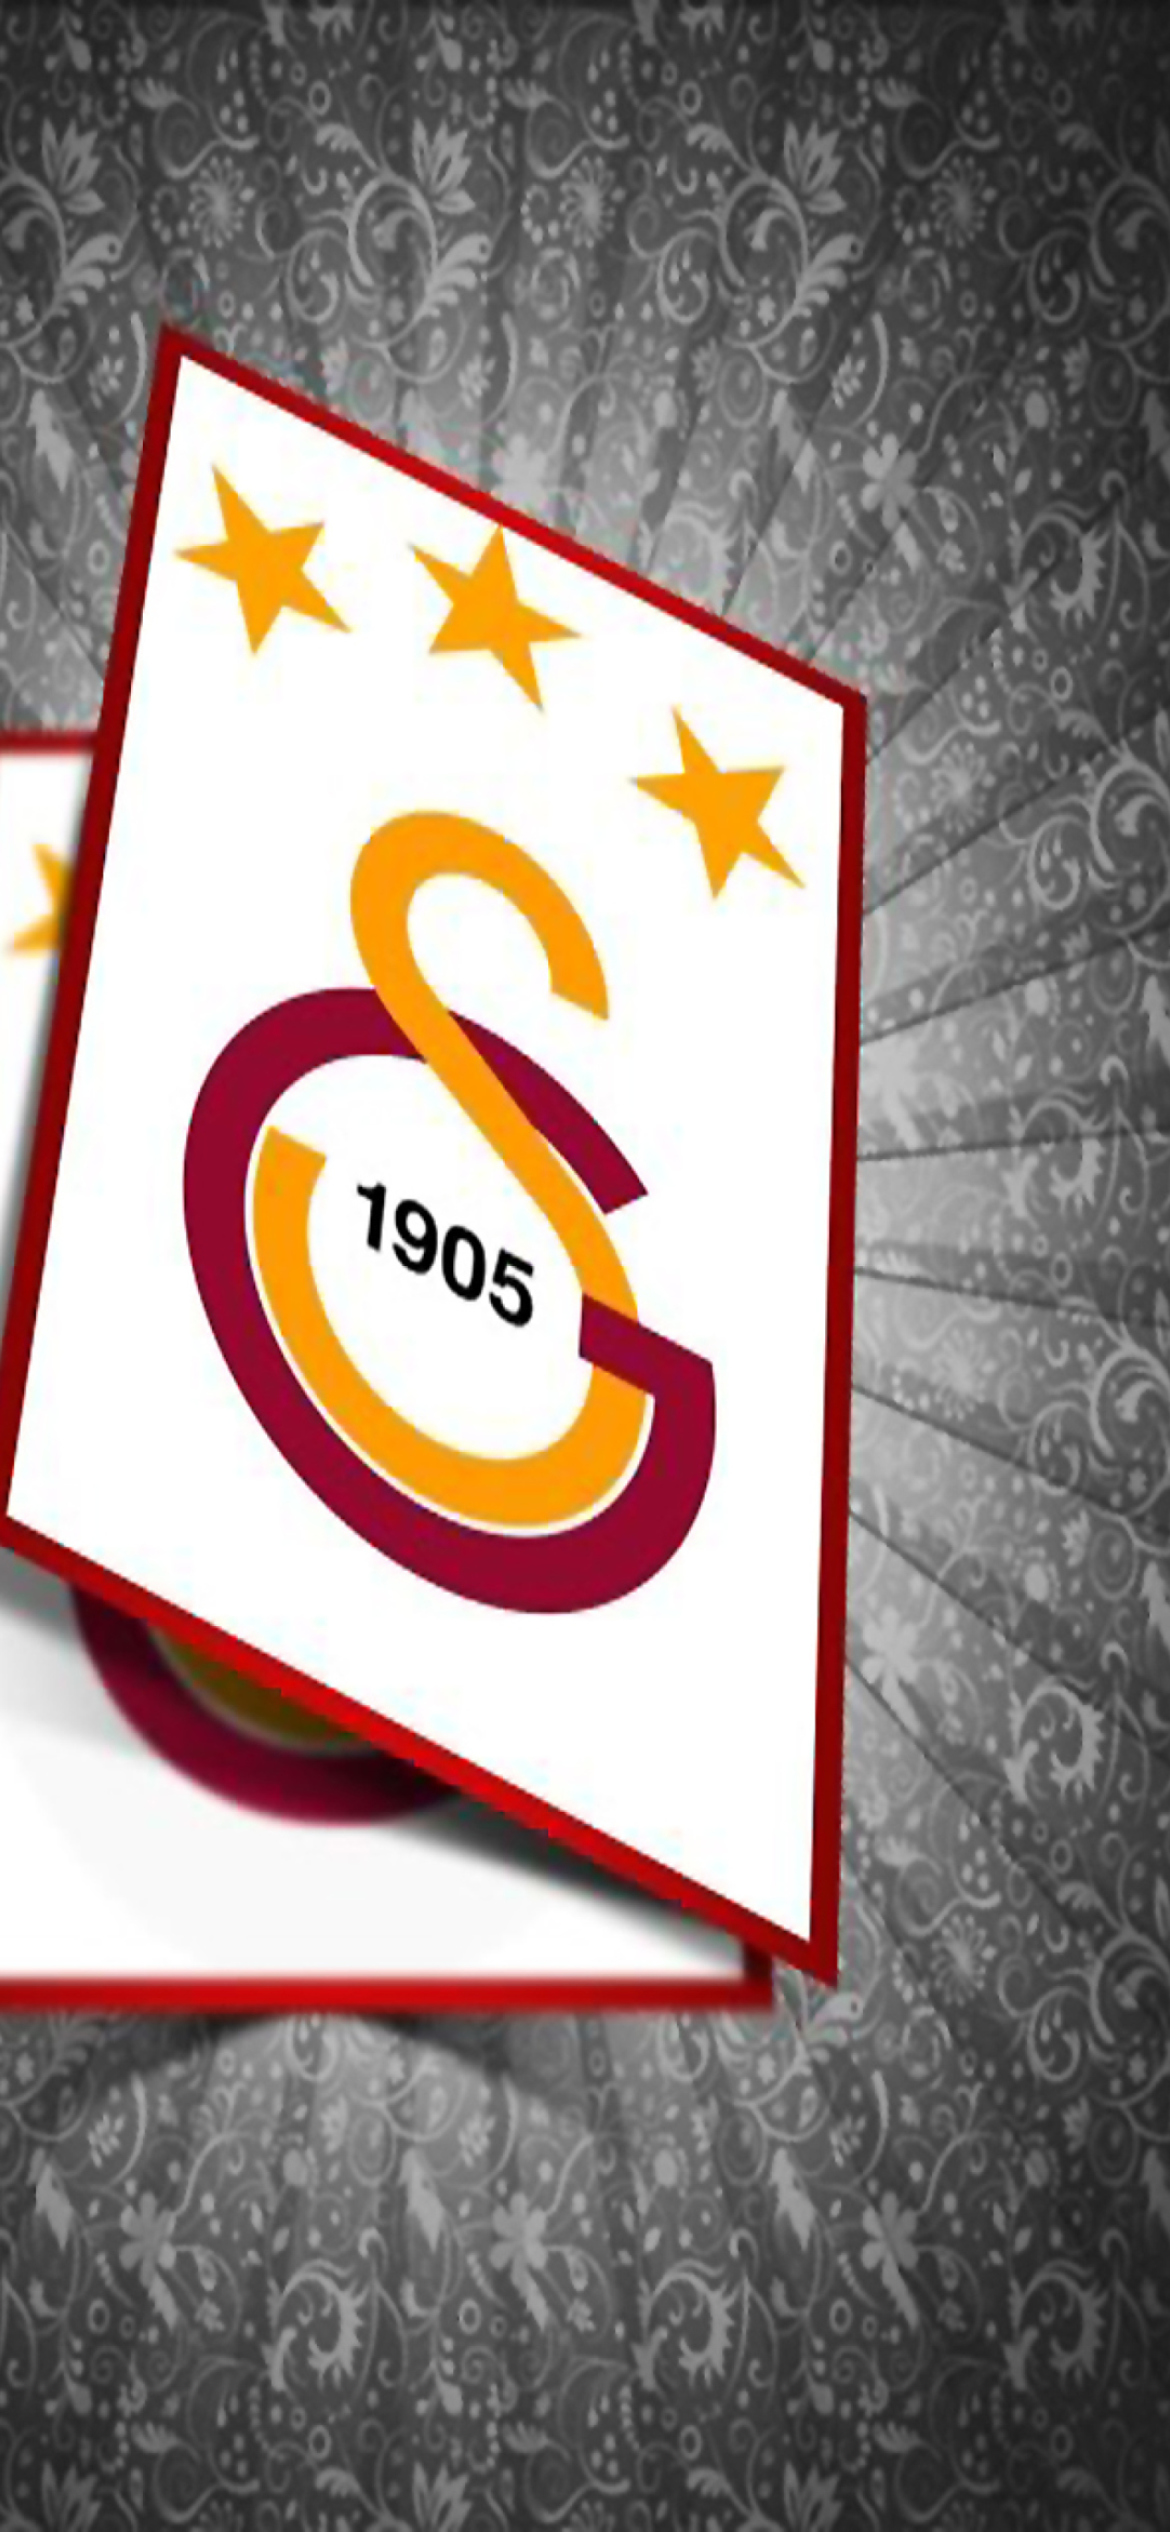 Galatasaray Wallpaper for iPhone 12 Pro